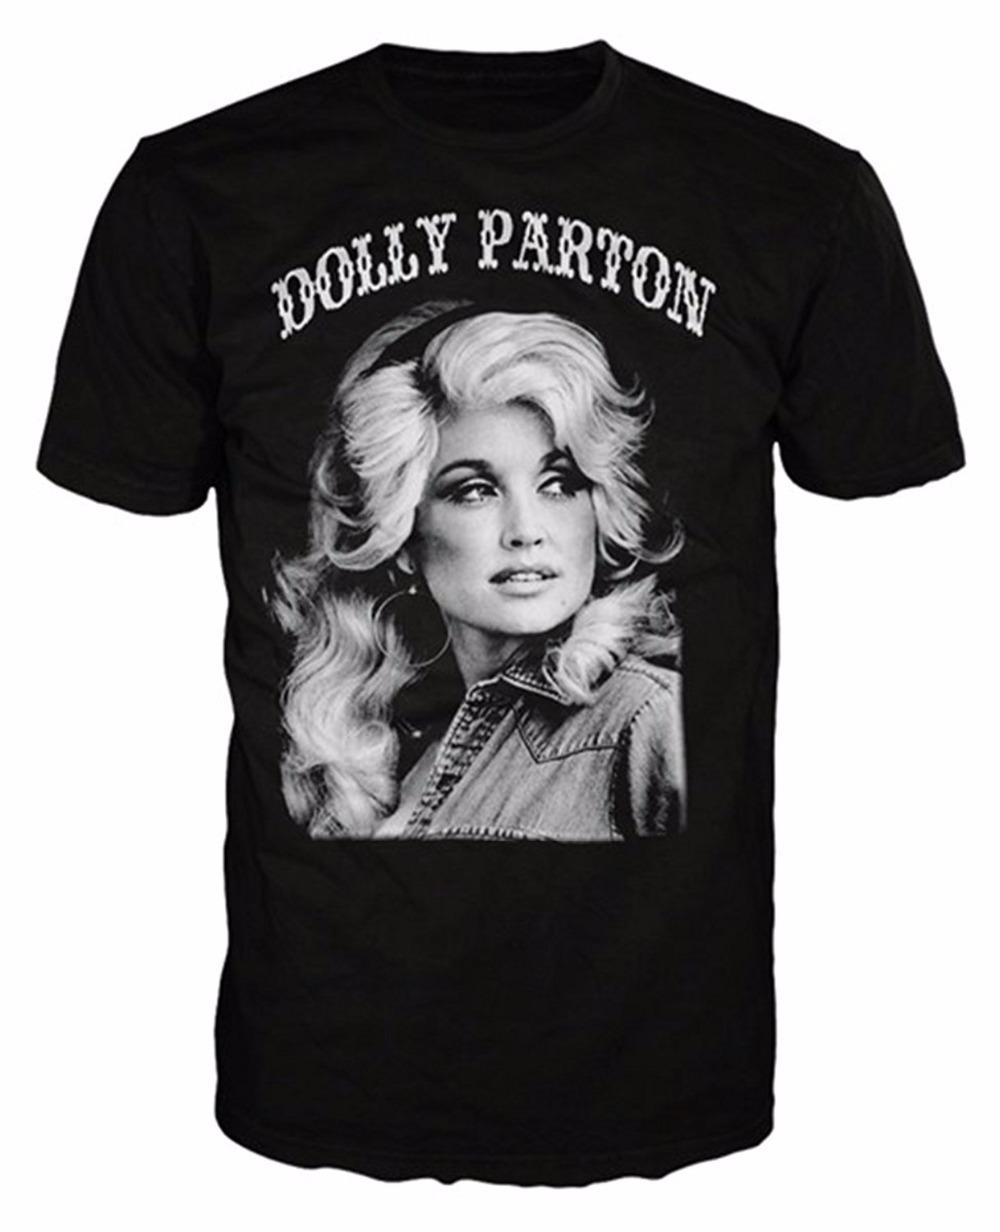 Cool SS Logo - Cool T Shirts Wholesale Crew Neck Short Sleeve Dolly Parton B&W ...